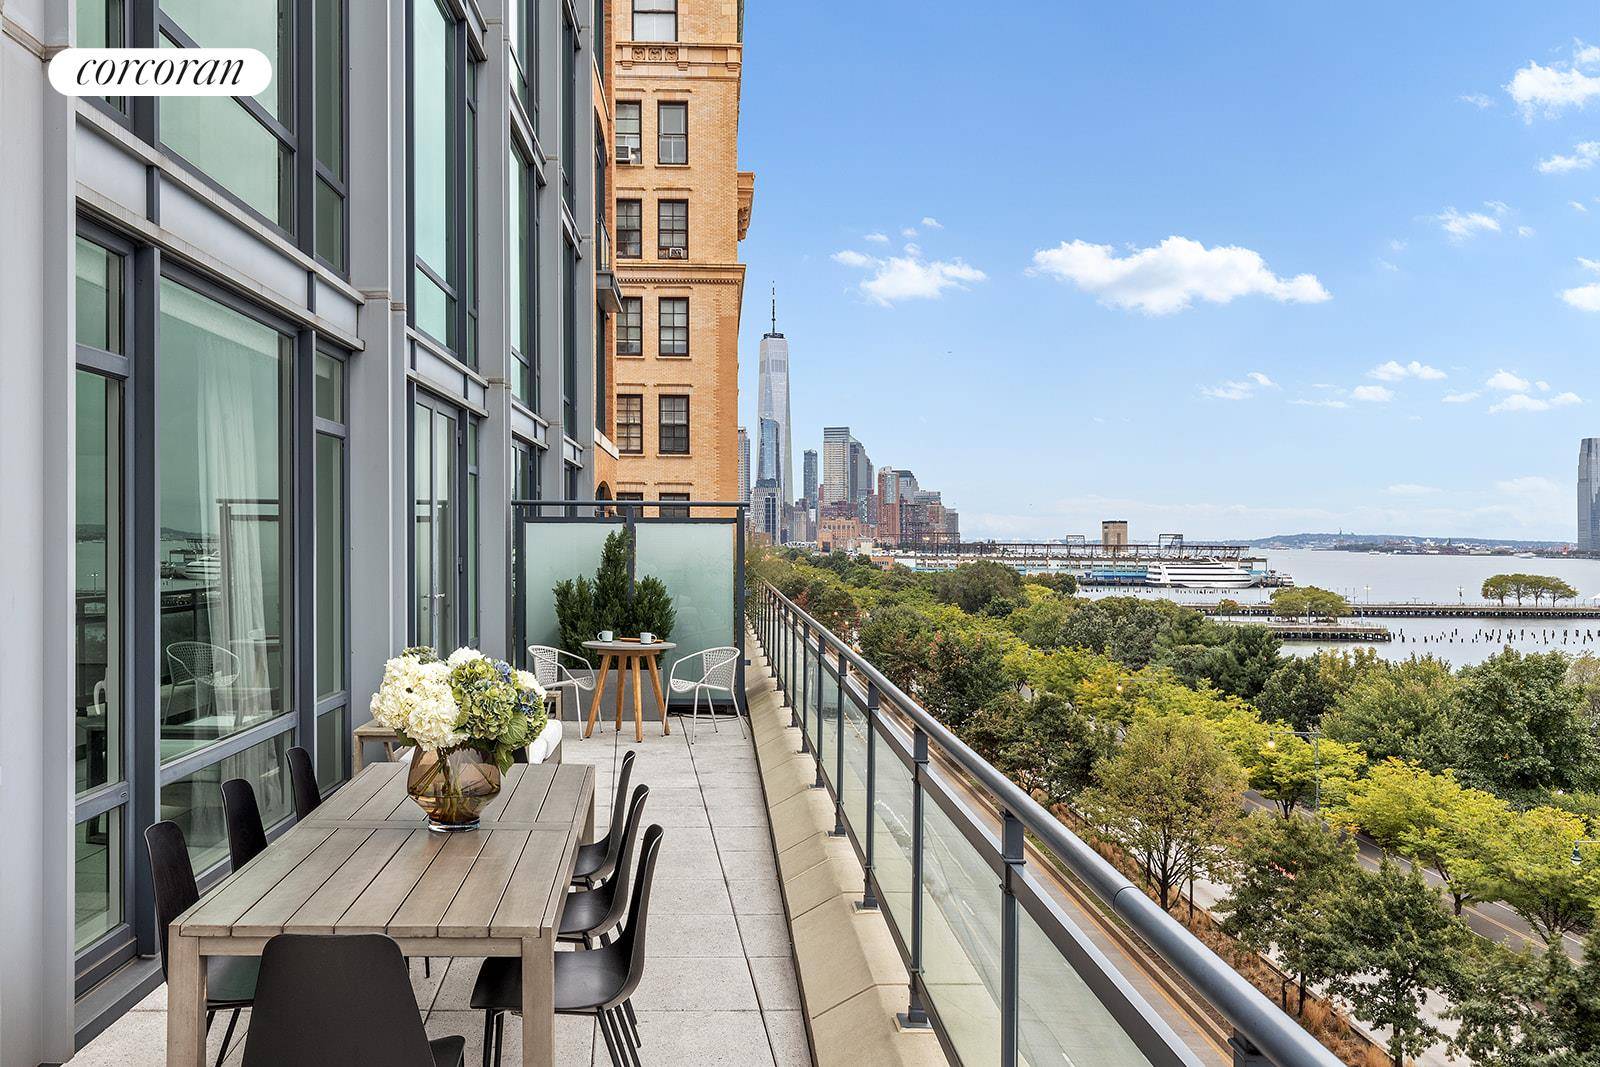 A rare opportunity to own a trophy West Village condo residence with private outdoor space and unobstructed views of the Hudson River.